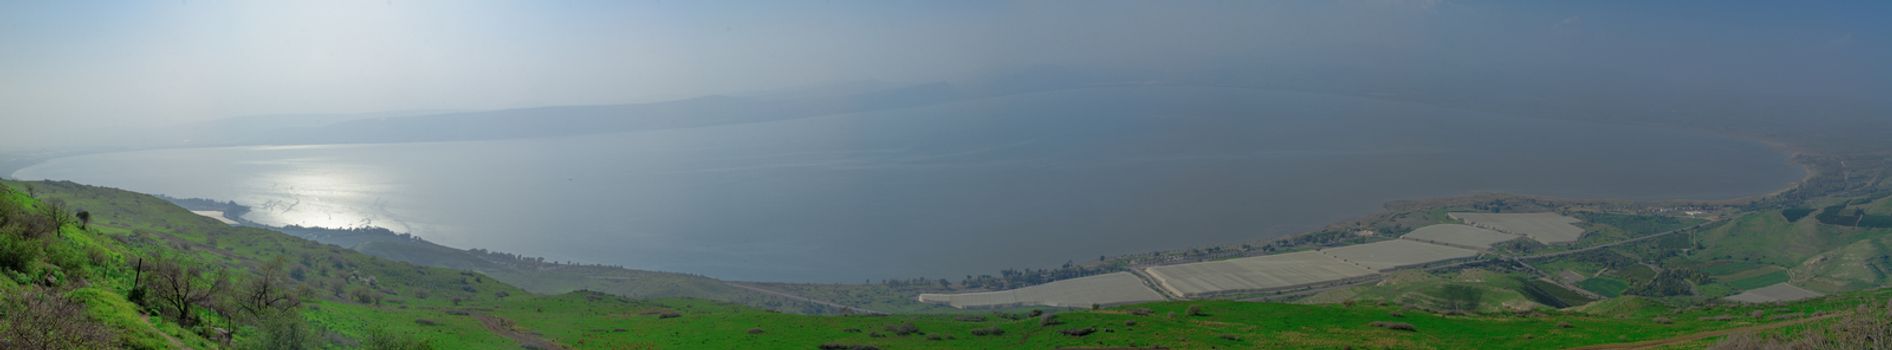 Panoramic view of the Sea of Galilee, from the east, Northern Israel